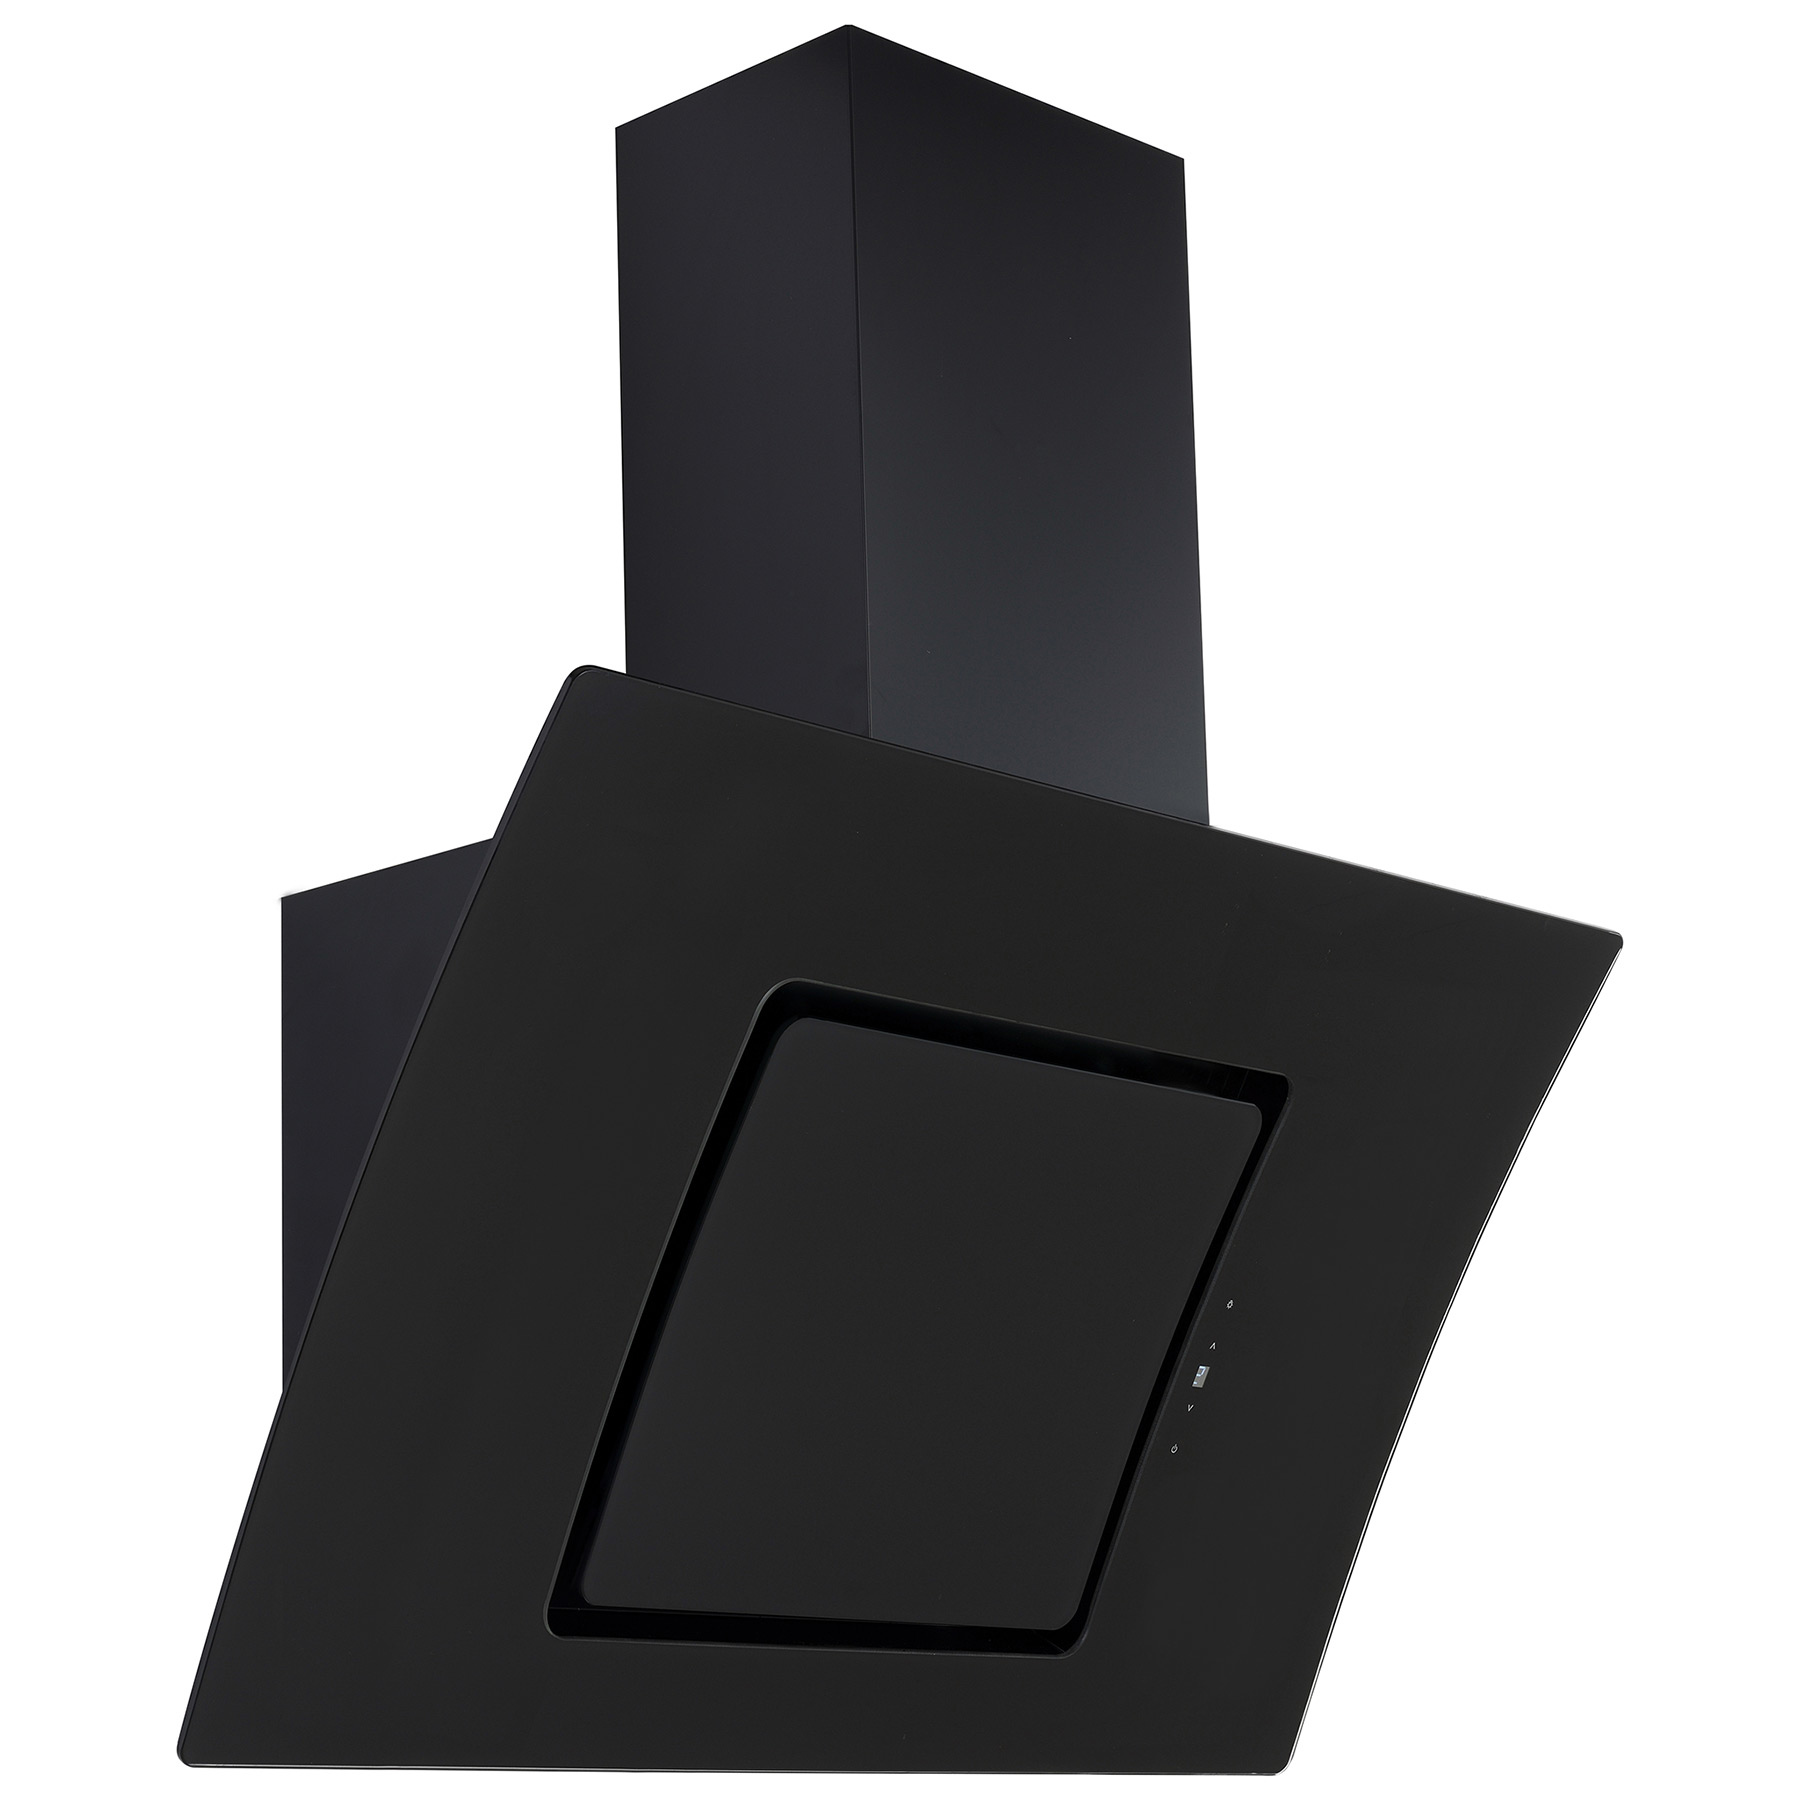 Image of Culina UBCUR70BK 70cm Curved Angled Chimney Hood in Black Touch Contro